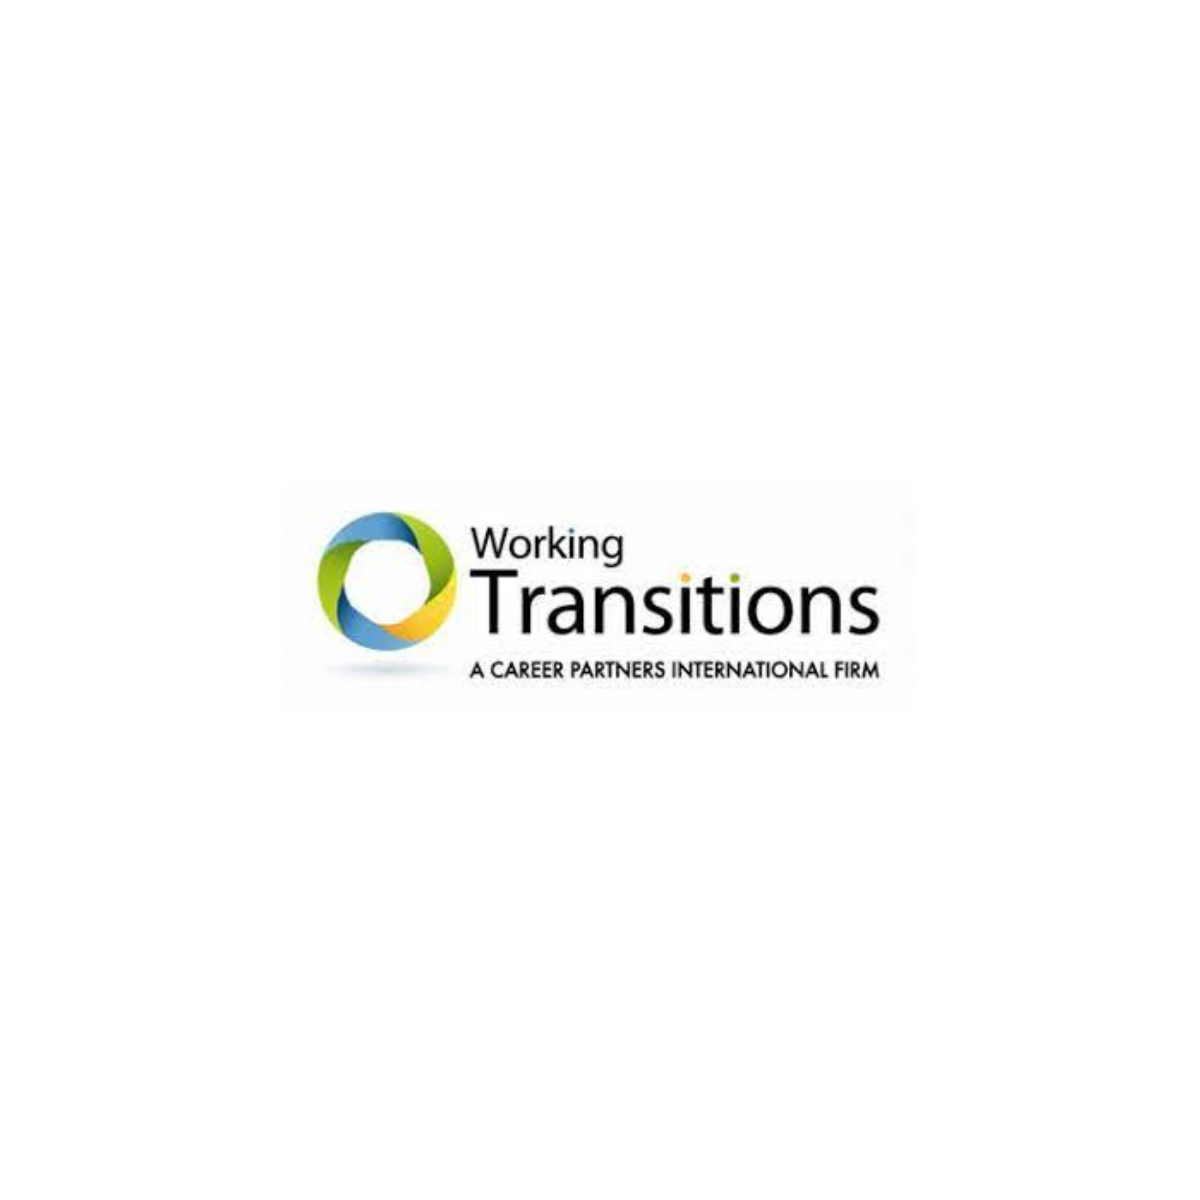 Working Transitions logo